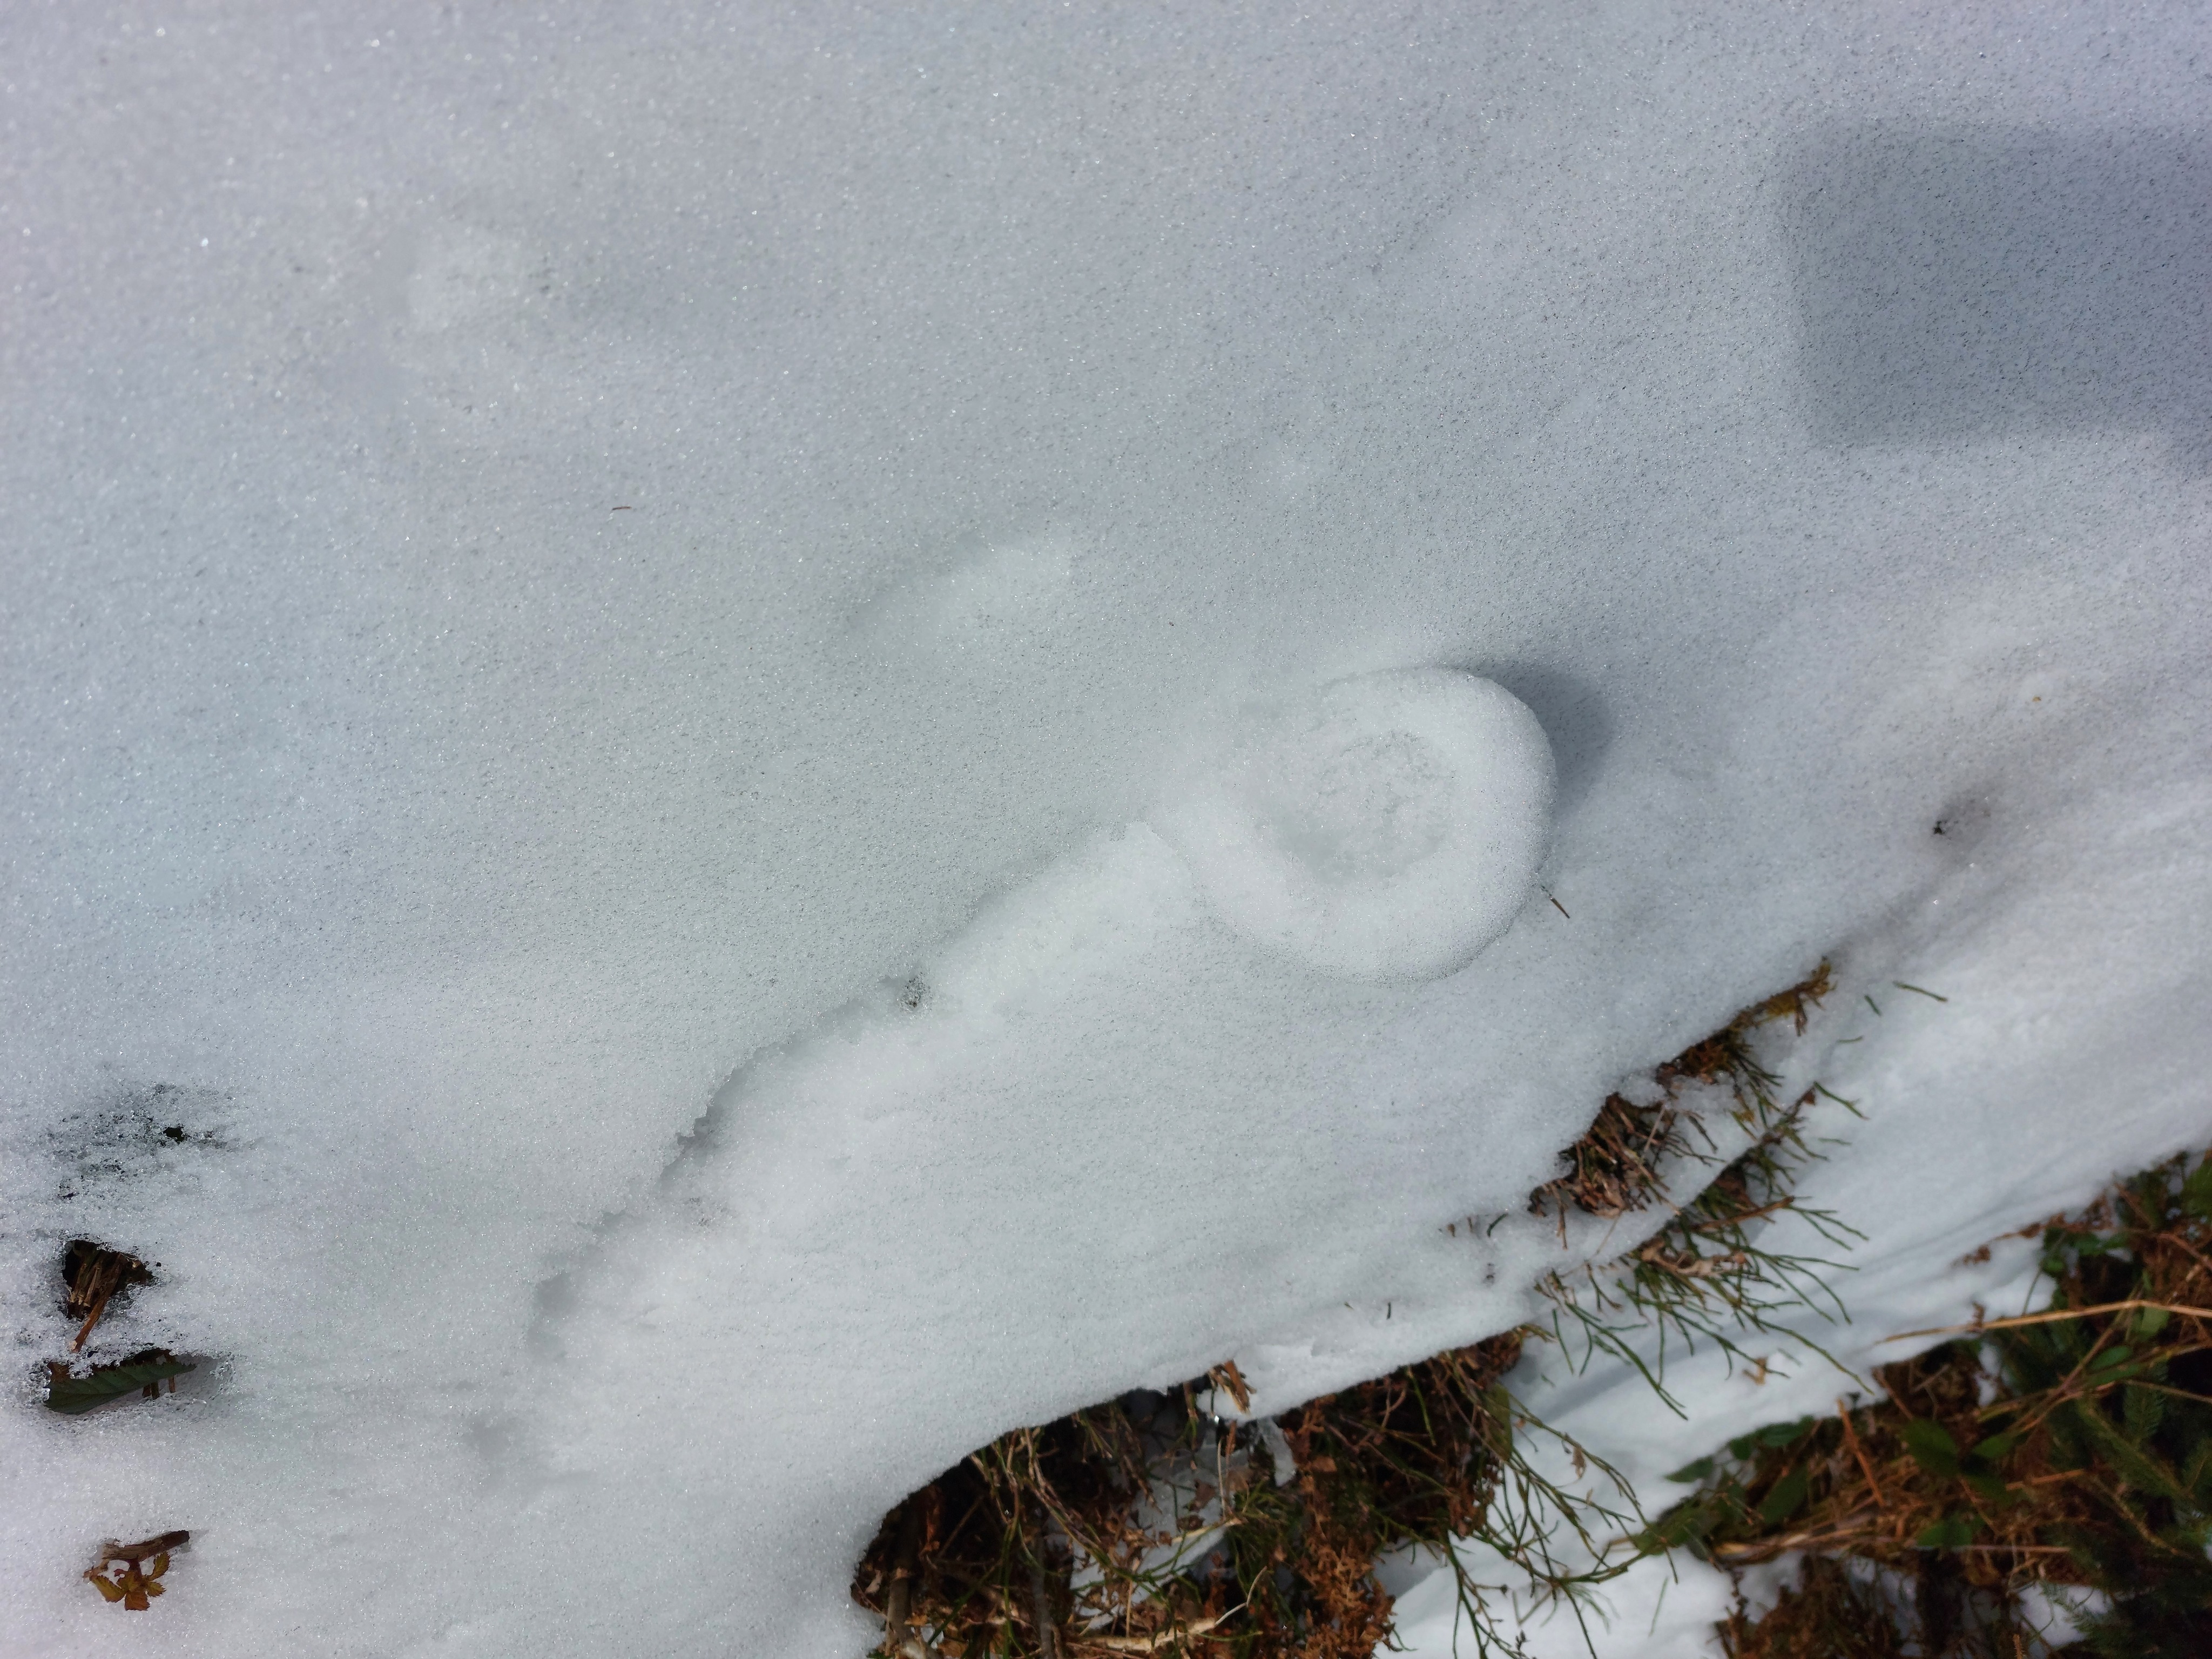 Snow rolled up into a spiral